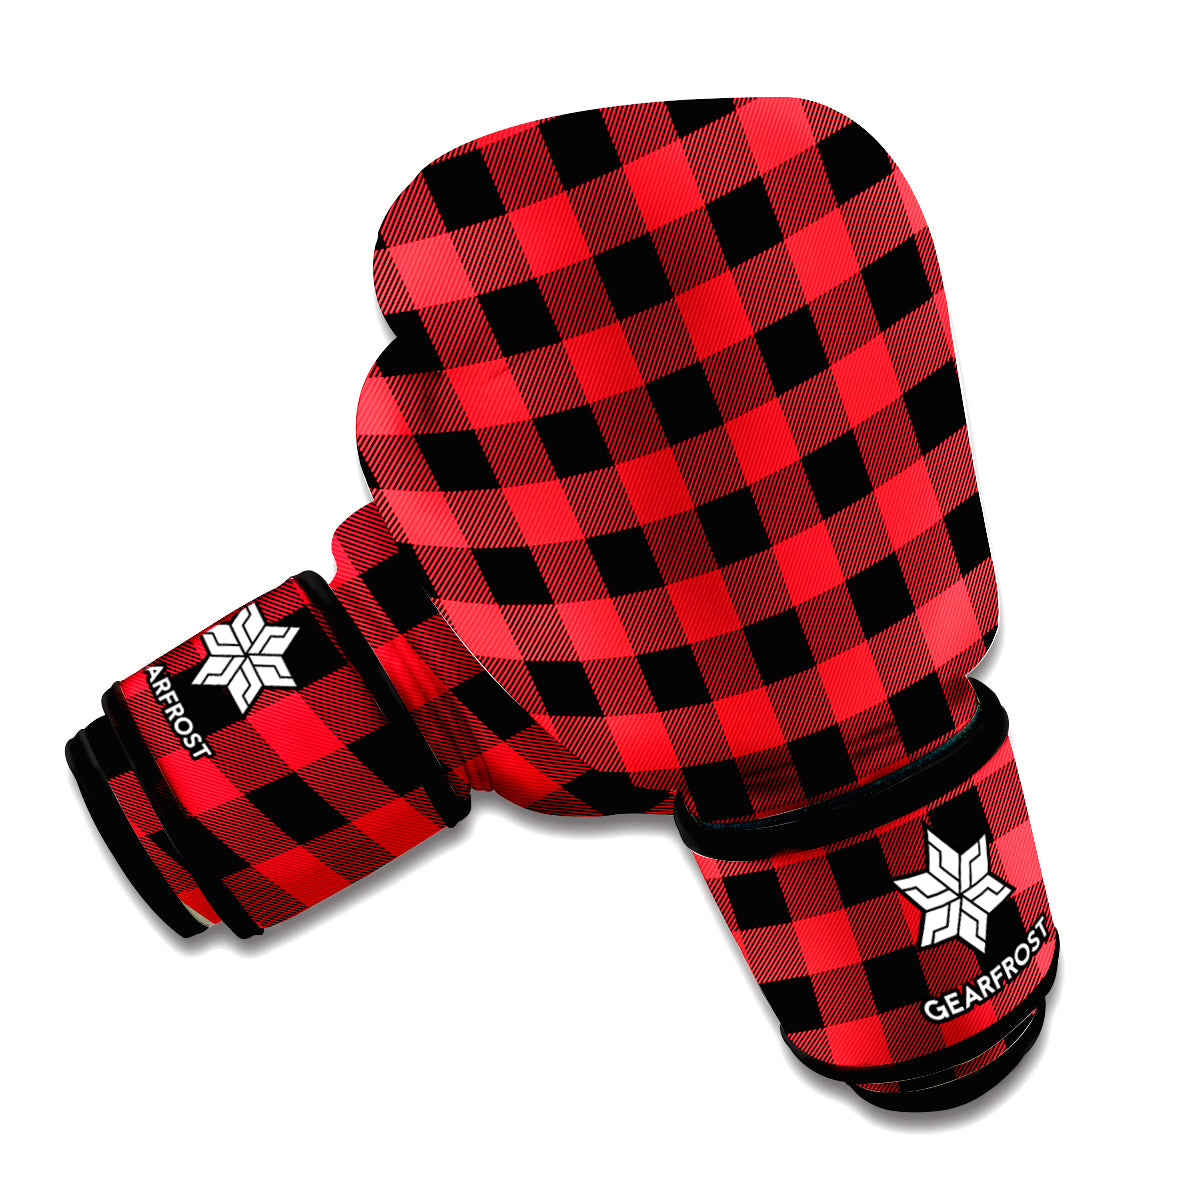 Red And Black Buffalo Plaid Print Boxing Gloves